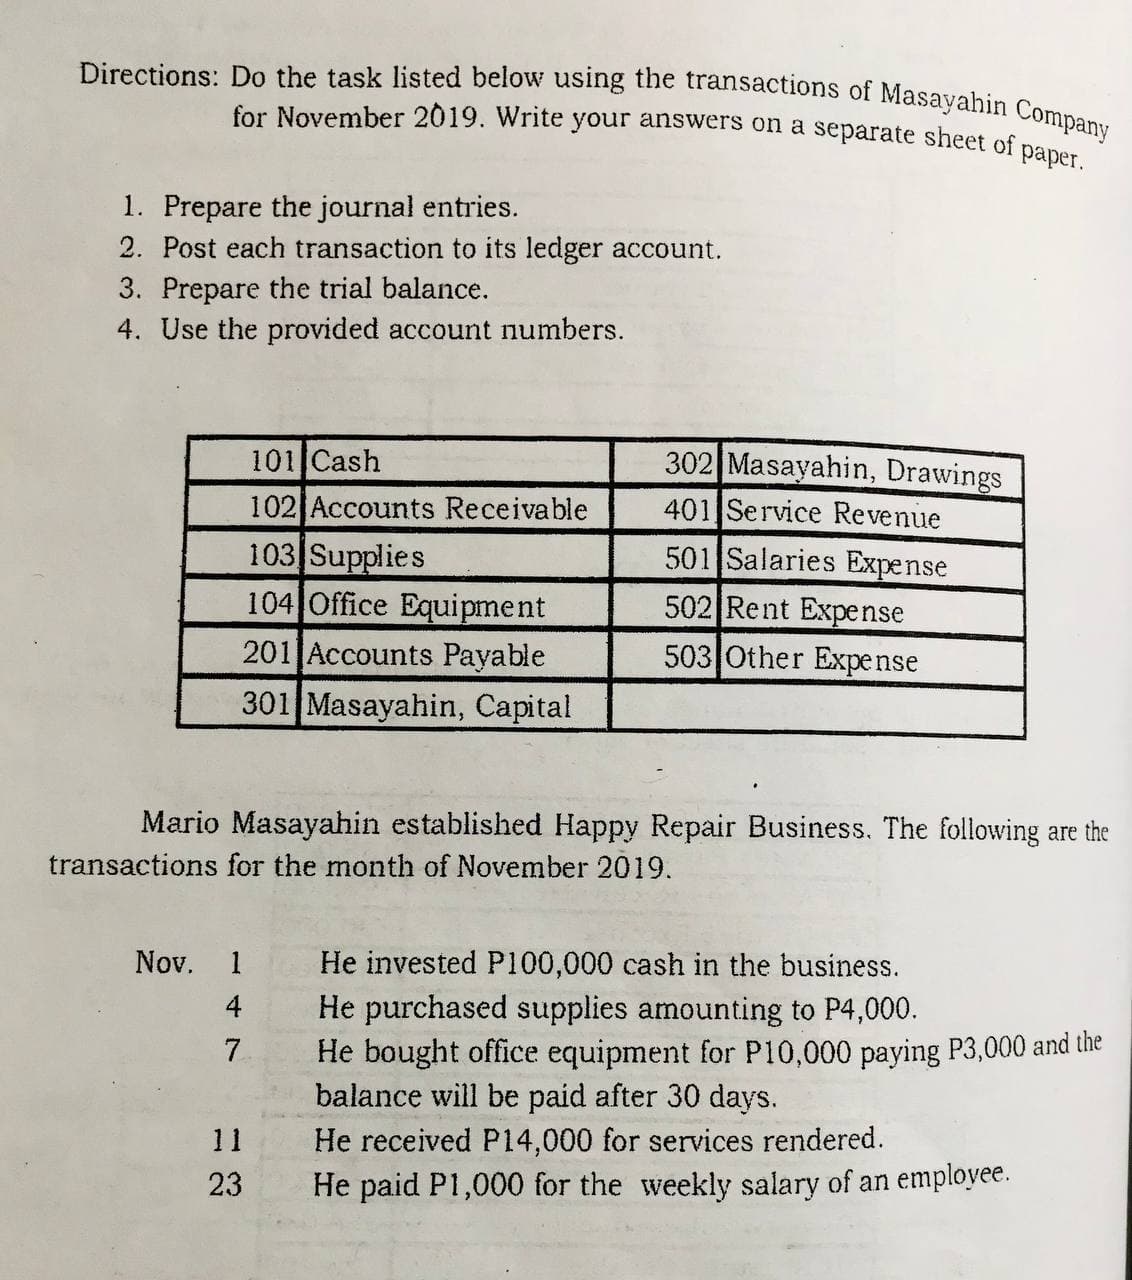 Directions: Do the task listed below using the transactions of Masayahin Company
for November 2019. Write your answers on a separate sheet of
paper.
1. Prepare the journal entries.
2. Post each transaction to its ledger account.
3. Prepare the trial balance.
4. Use the provided account numbers.
302 Masayahin, Drawings
401 Service Revenue
101 Cash
102 Accounts Receivable
103 Supplies
104 Office Equipment
501 Salaries Expense
502 Rent Expense
503 Other Expense
201 Accounts Payable
301 Masayahin, Capital
Mario Masayahin established Happy Repair Business. The following are the
transactions for the month of November 2019.
Nov.
1
He invested P100,000 cash in the business.
He purchased supplies amounting to P4,000.
He bought office equipment for P10,000 paying P3,000 and the
balance will be paid after 30 days.
He received P14,000 for services rendered.
4
7.
11
23
He paid P1,000 for the weekly salary of an employee.
